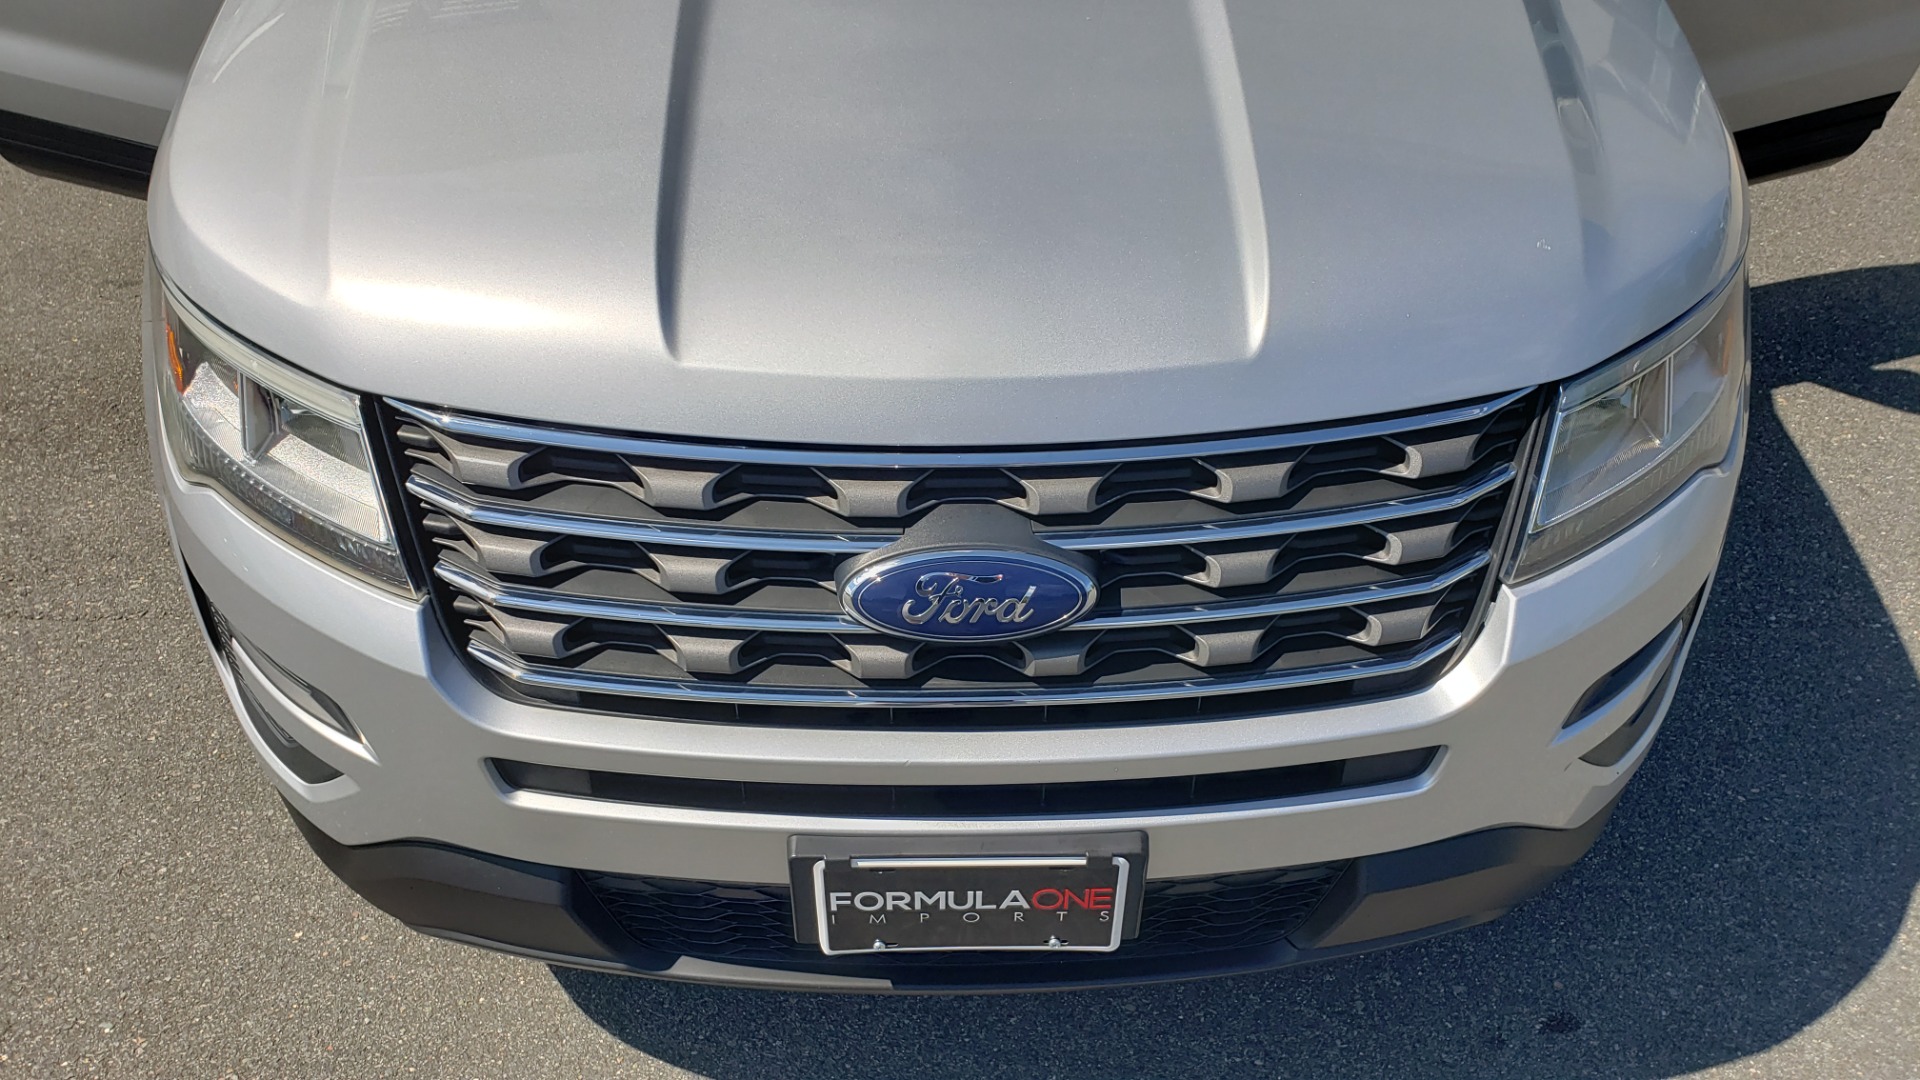 Used 2017 Ford EXPLORER 3.5L V6 / 6-SPD AUTO / BLIND SPOT MONITOR / 3-ROW / SYNC / REARVIEW for sale Sold at Formula Imports in Charlotte NC 28227 24